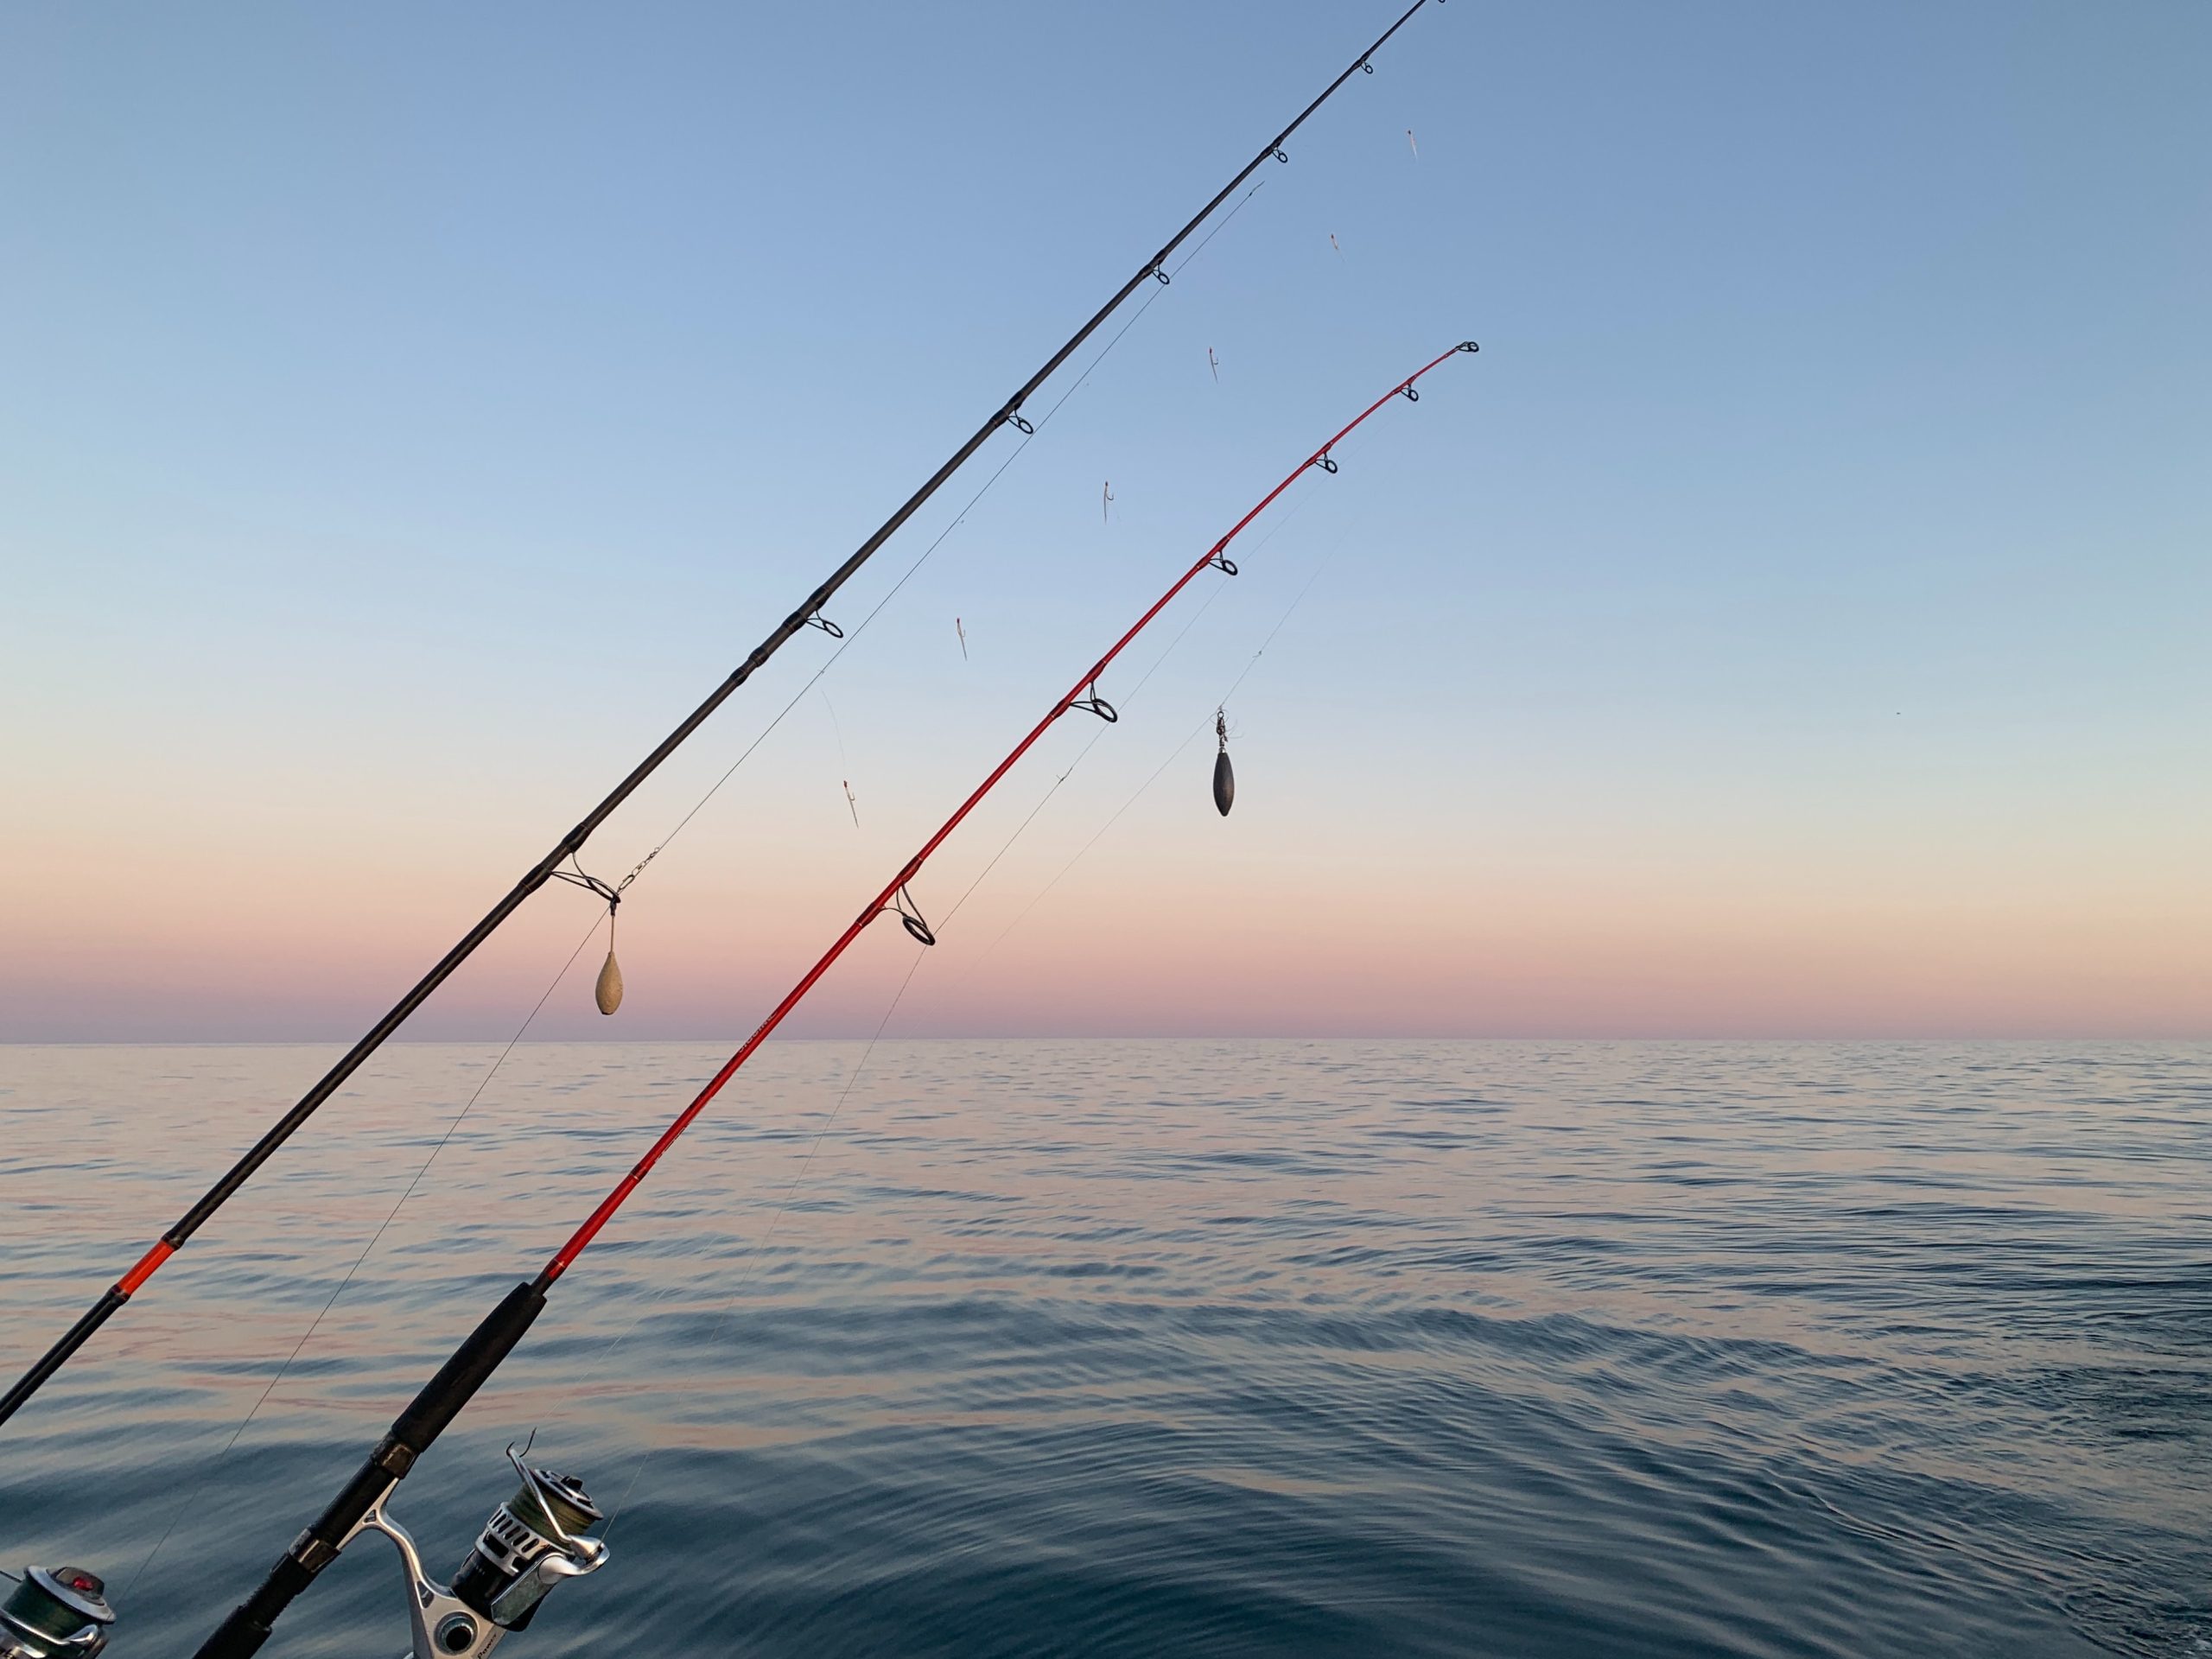 Photograph of two fishing rods overlooking the ocean